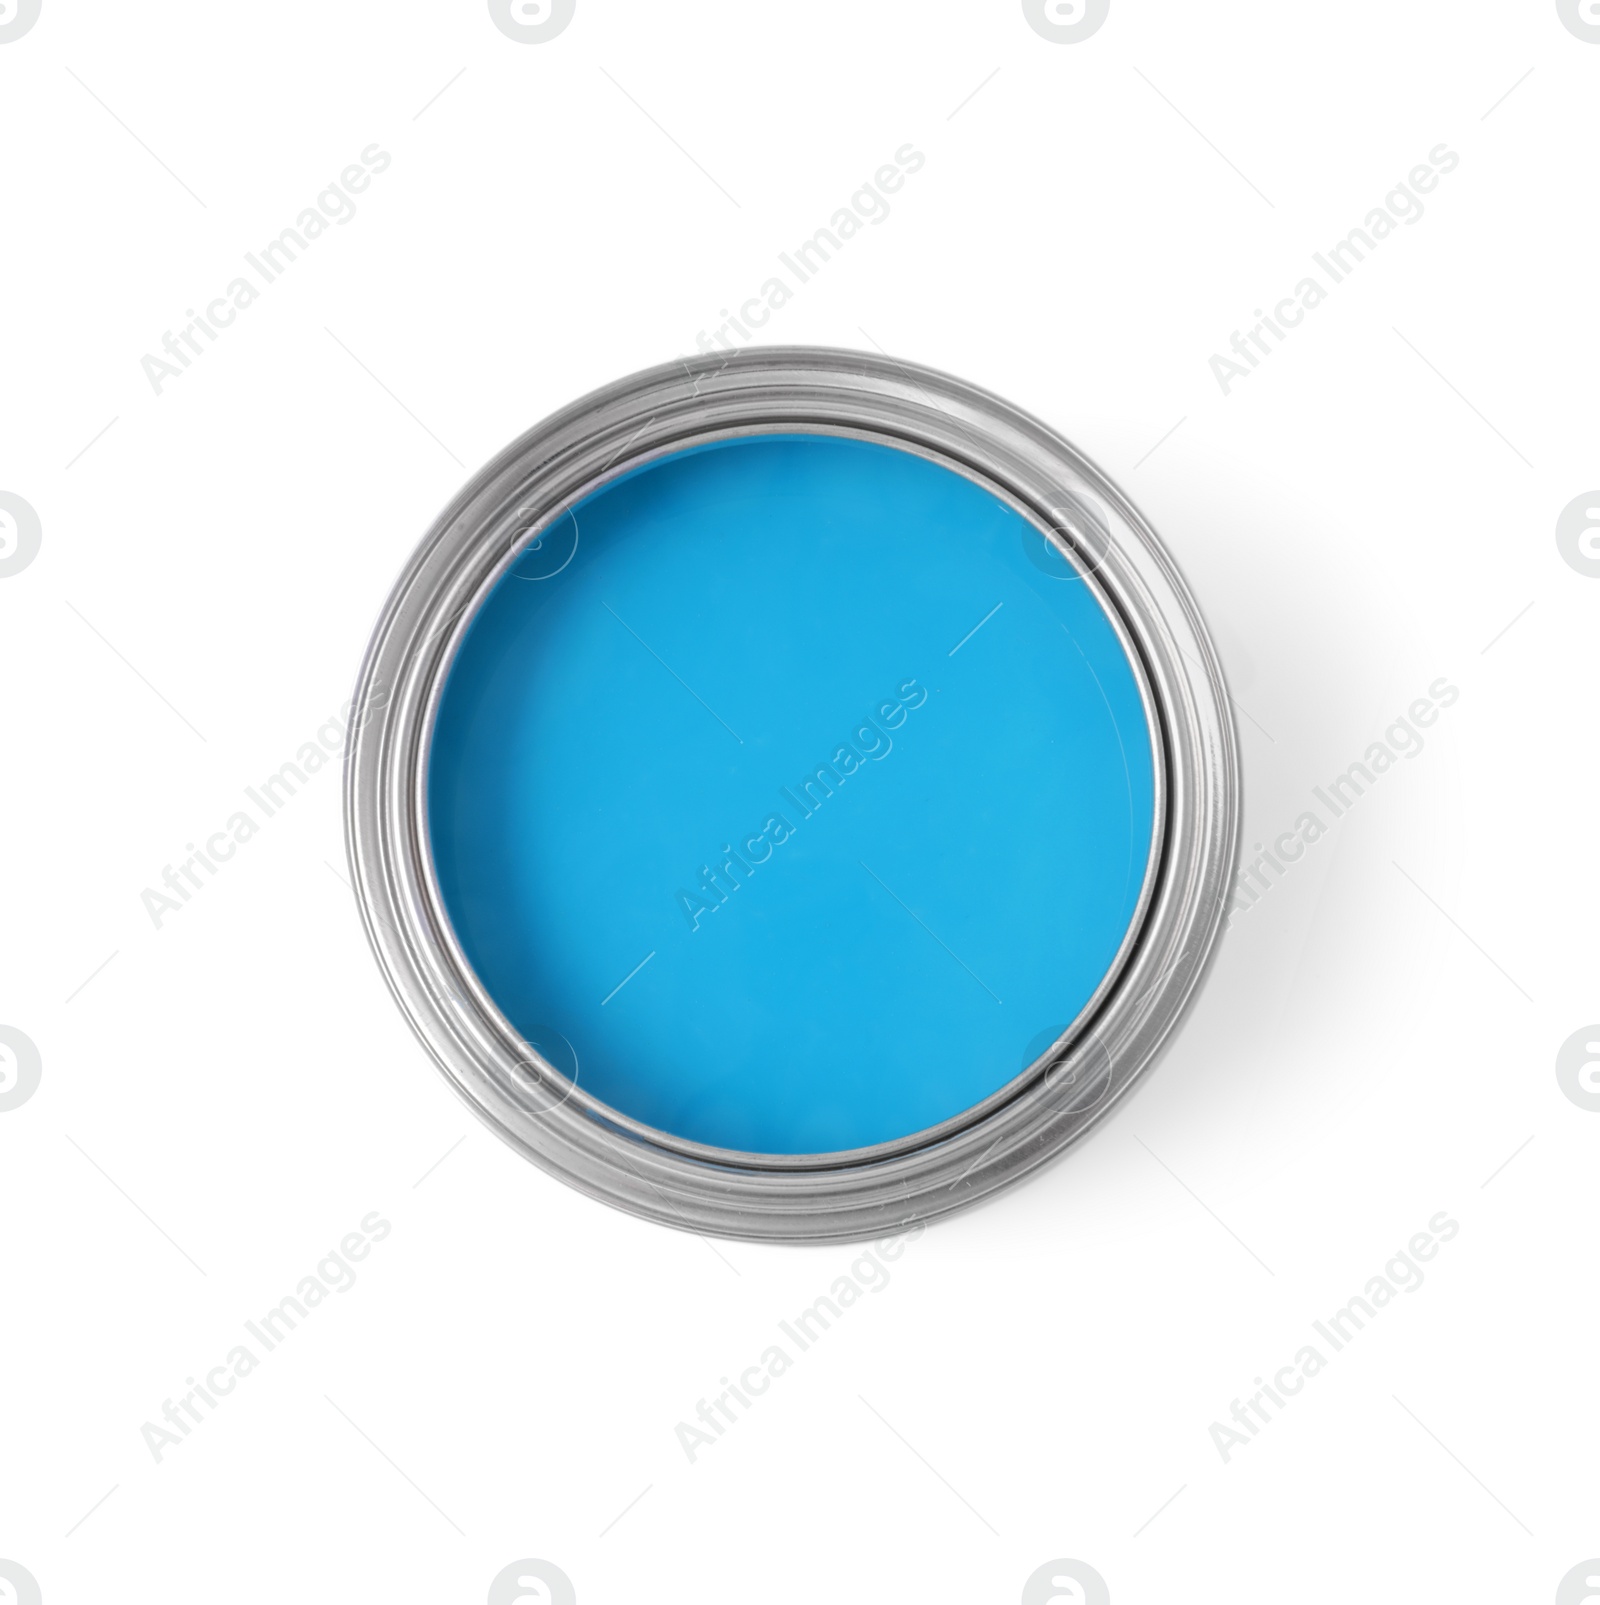 Photo of Can with light blue paint on white background, top view